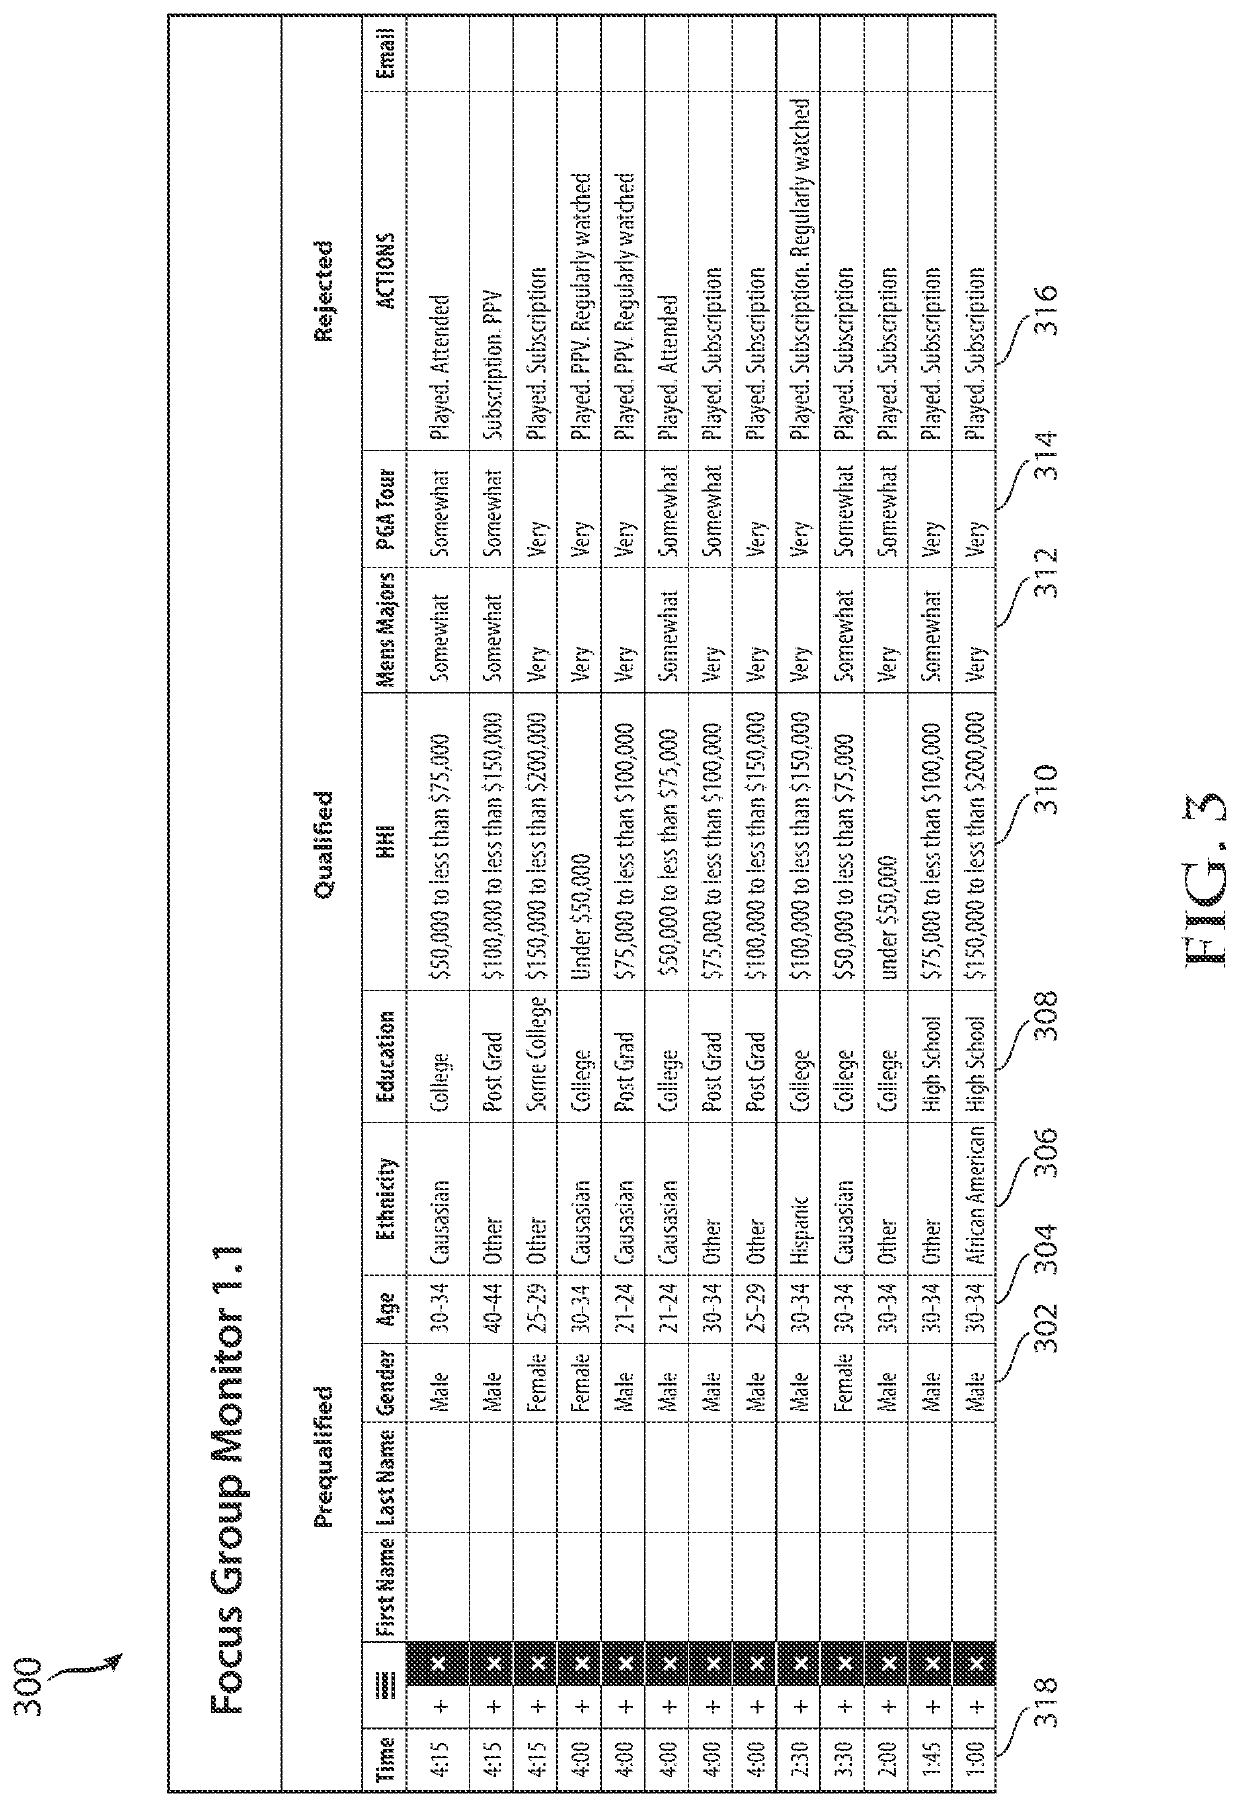 Systems and Methods for Providing Live Online Focus Group Data